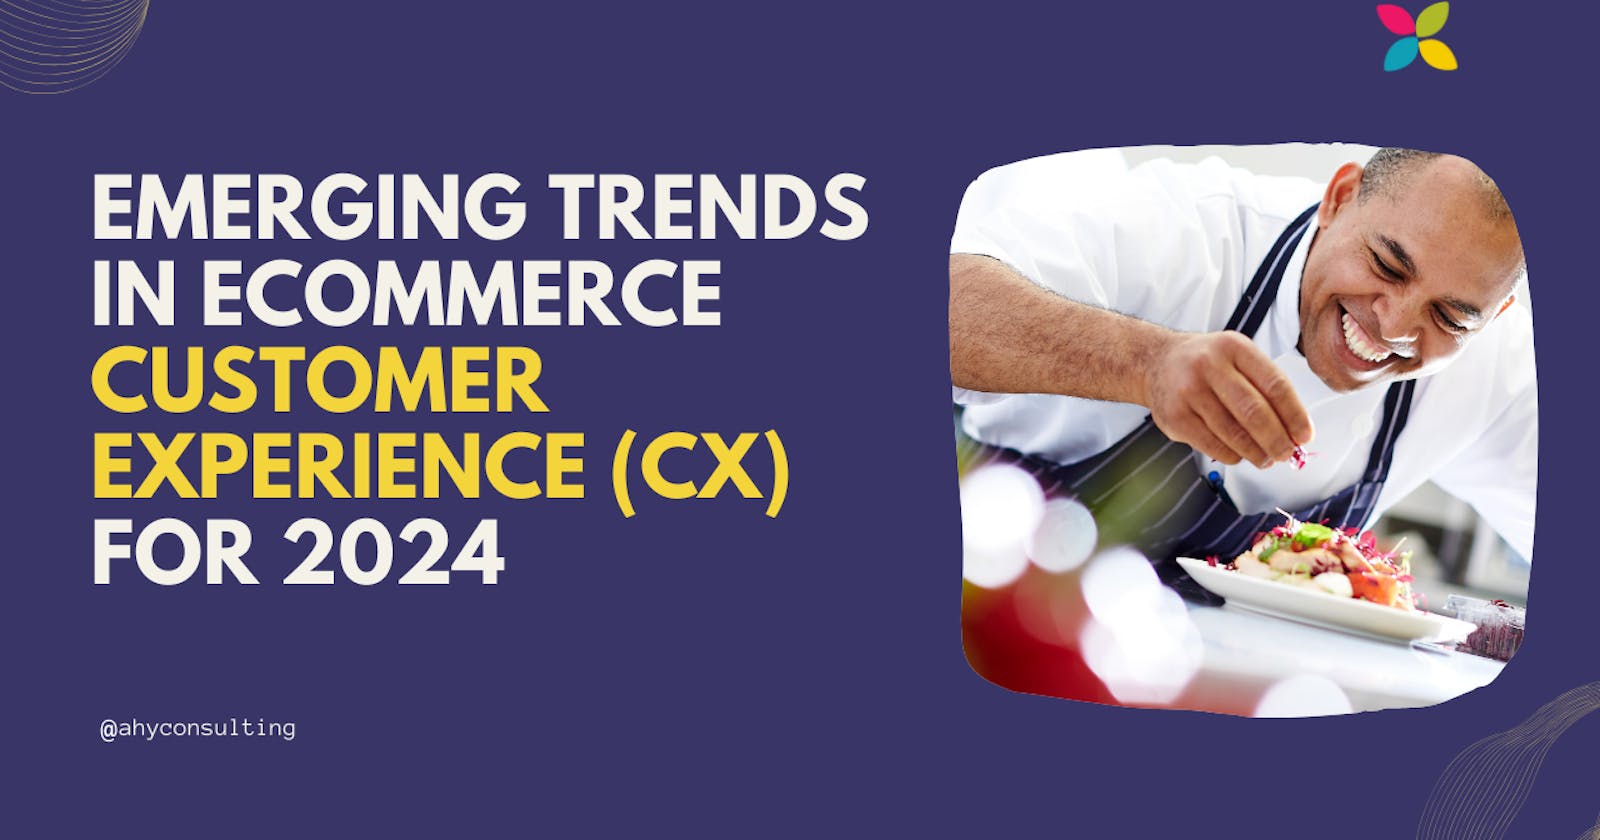 Emerging Trends in eCommerce Customer Experience (CX) for 2024